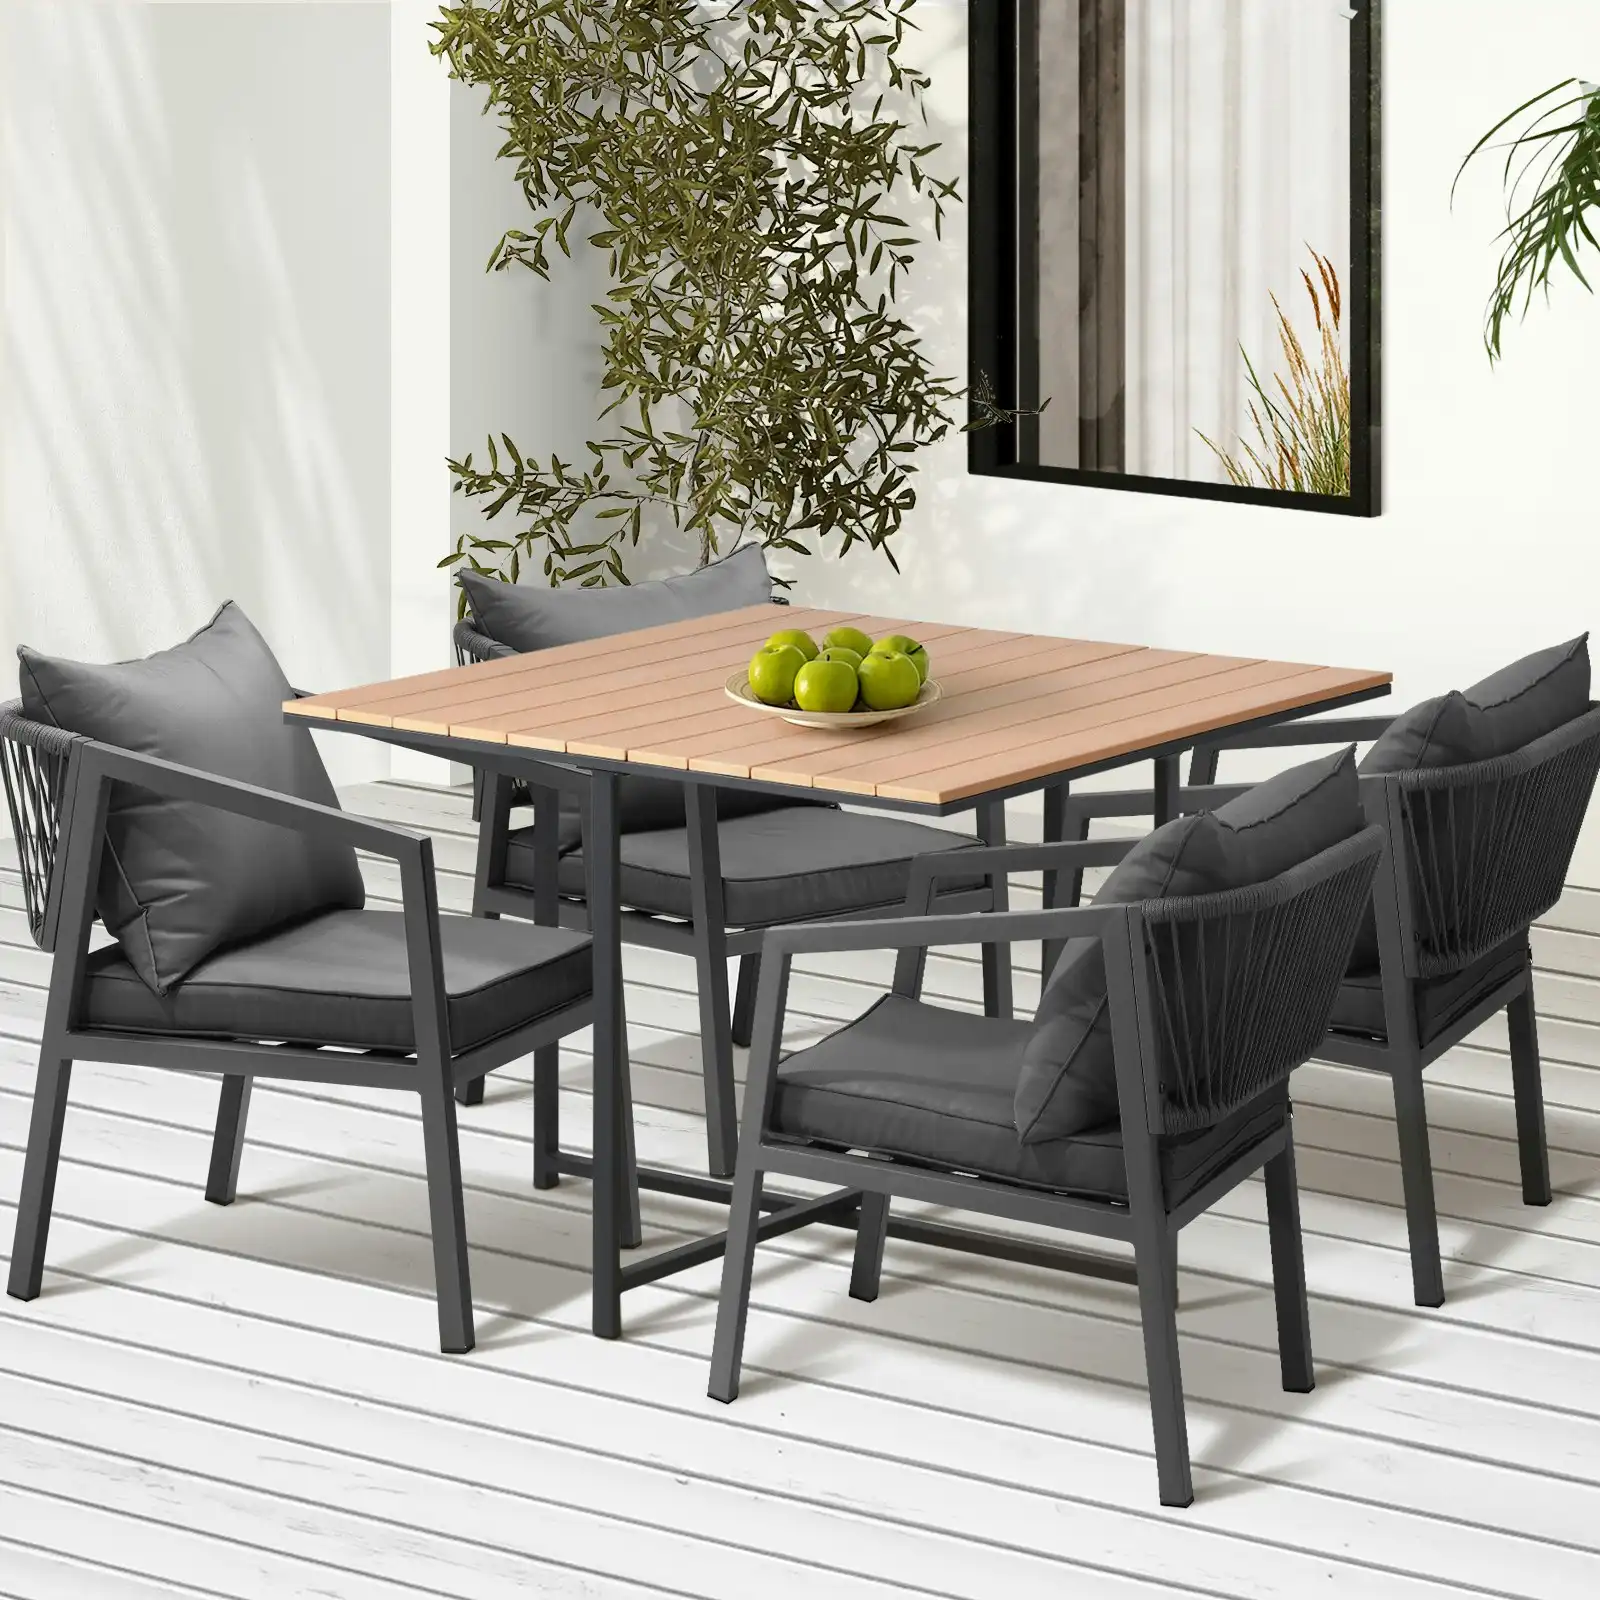 Livsip 4 Seater Outdoor Dining Set Patio Furniture Garden Table Chairs Setting